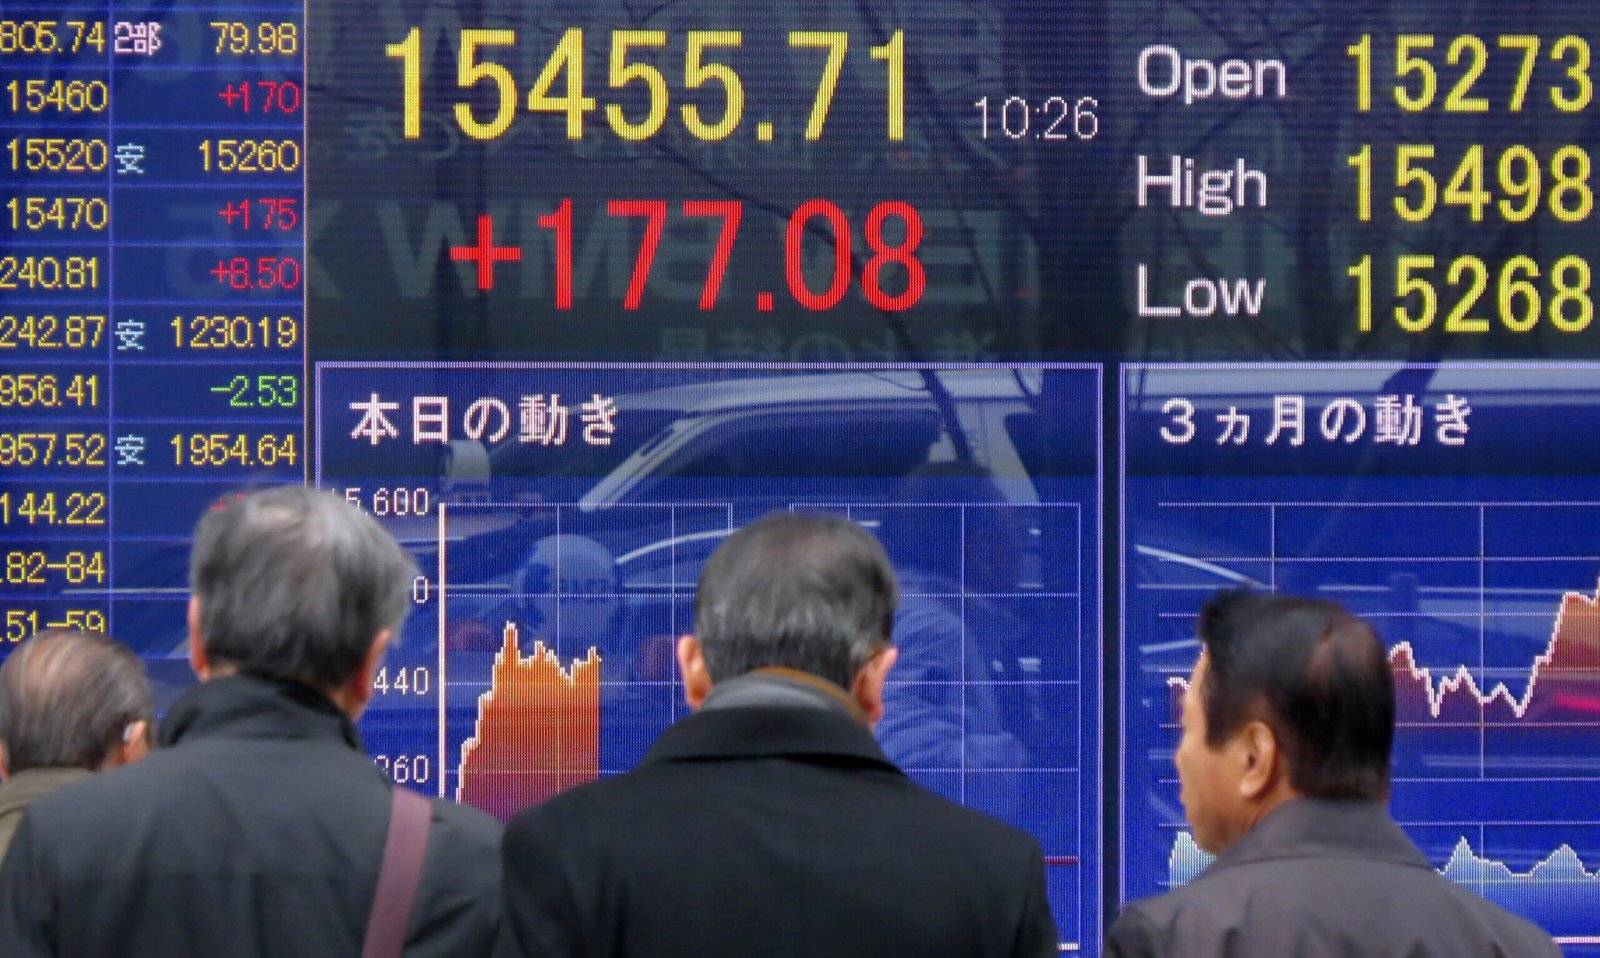 Why Has Japan's Nikkei Stock Index Fallen 130%?